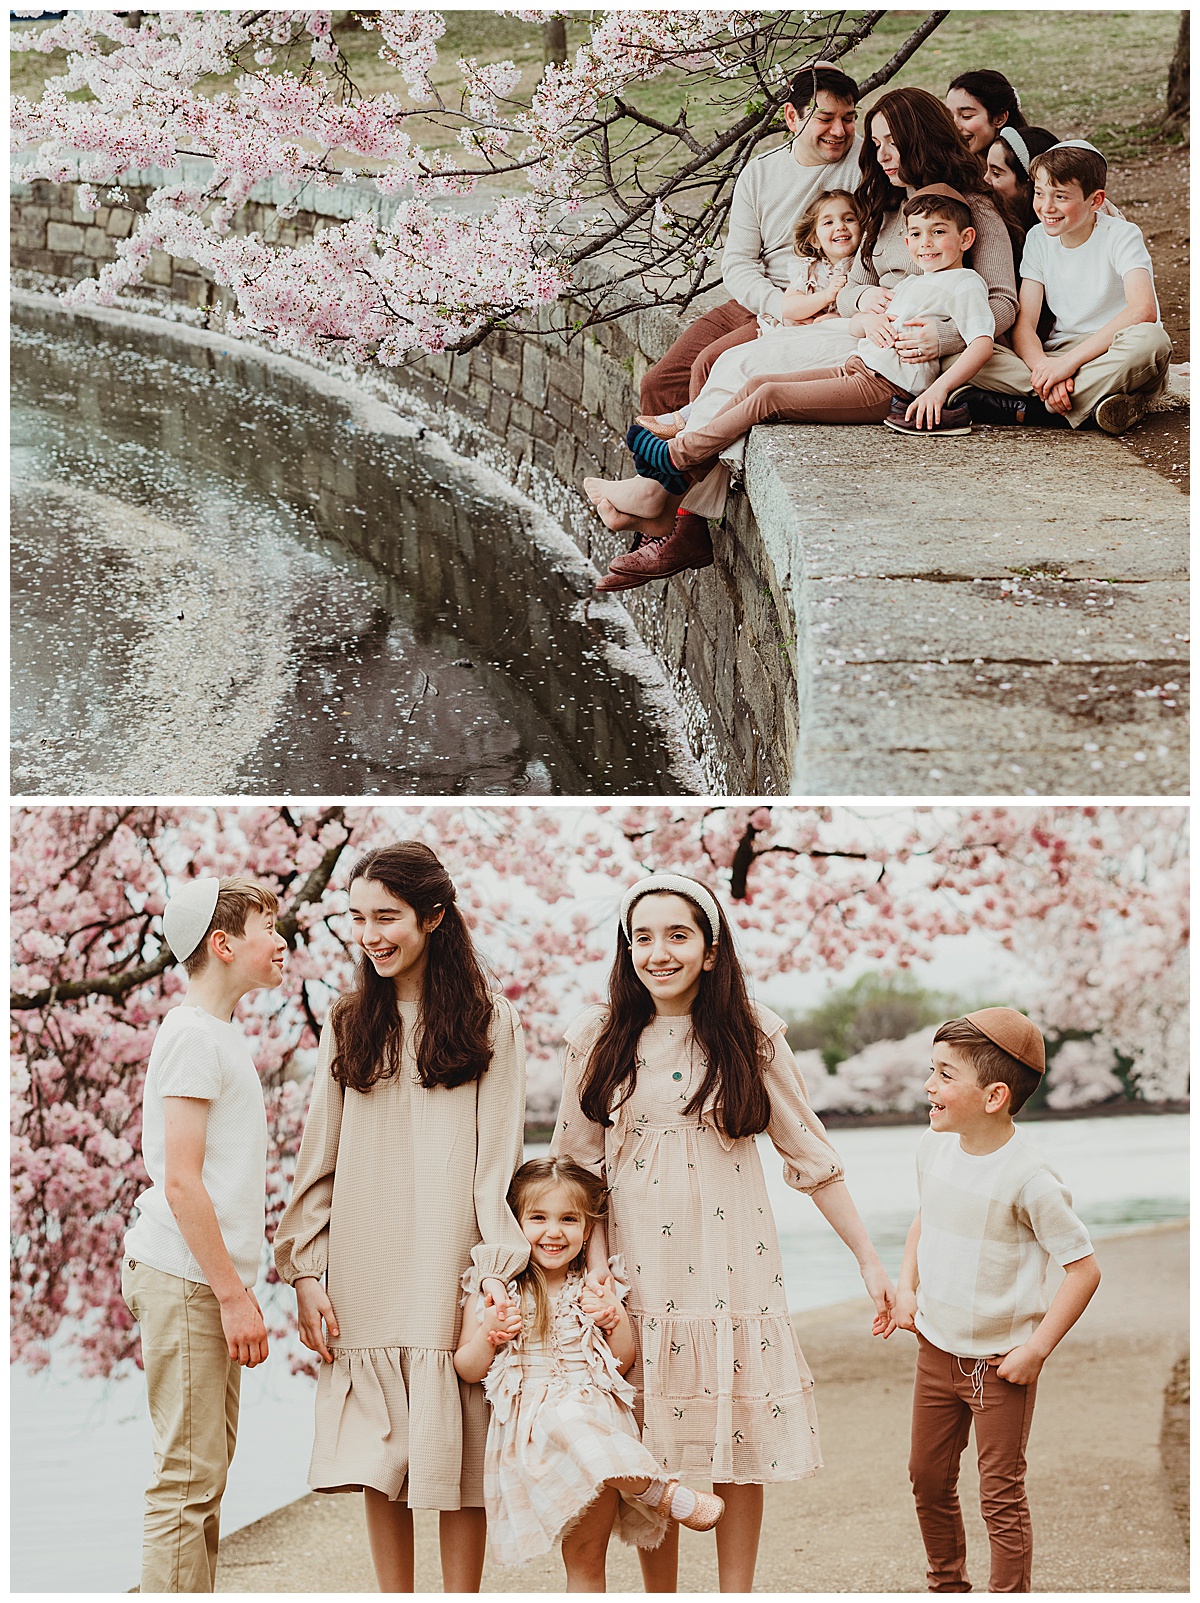 Kids smile and laugh together for Virginia Family Photographer